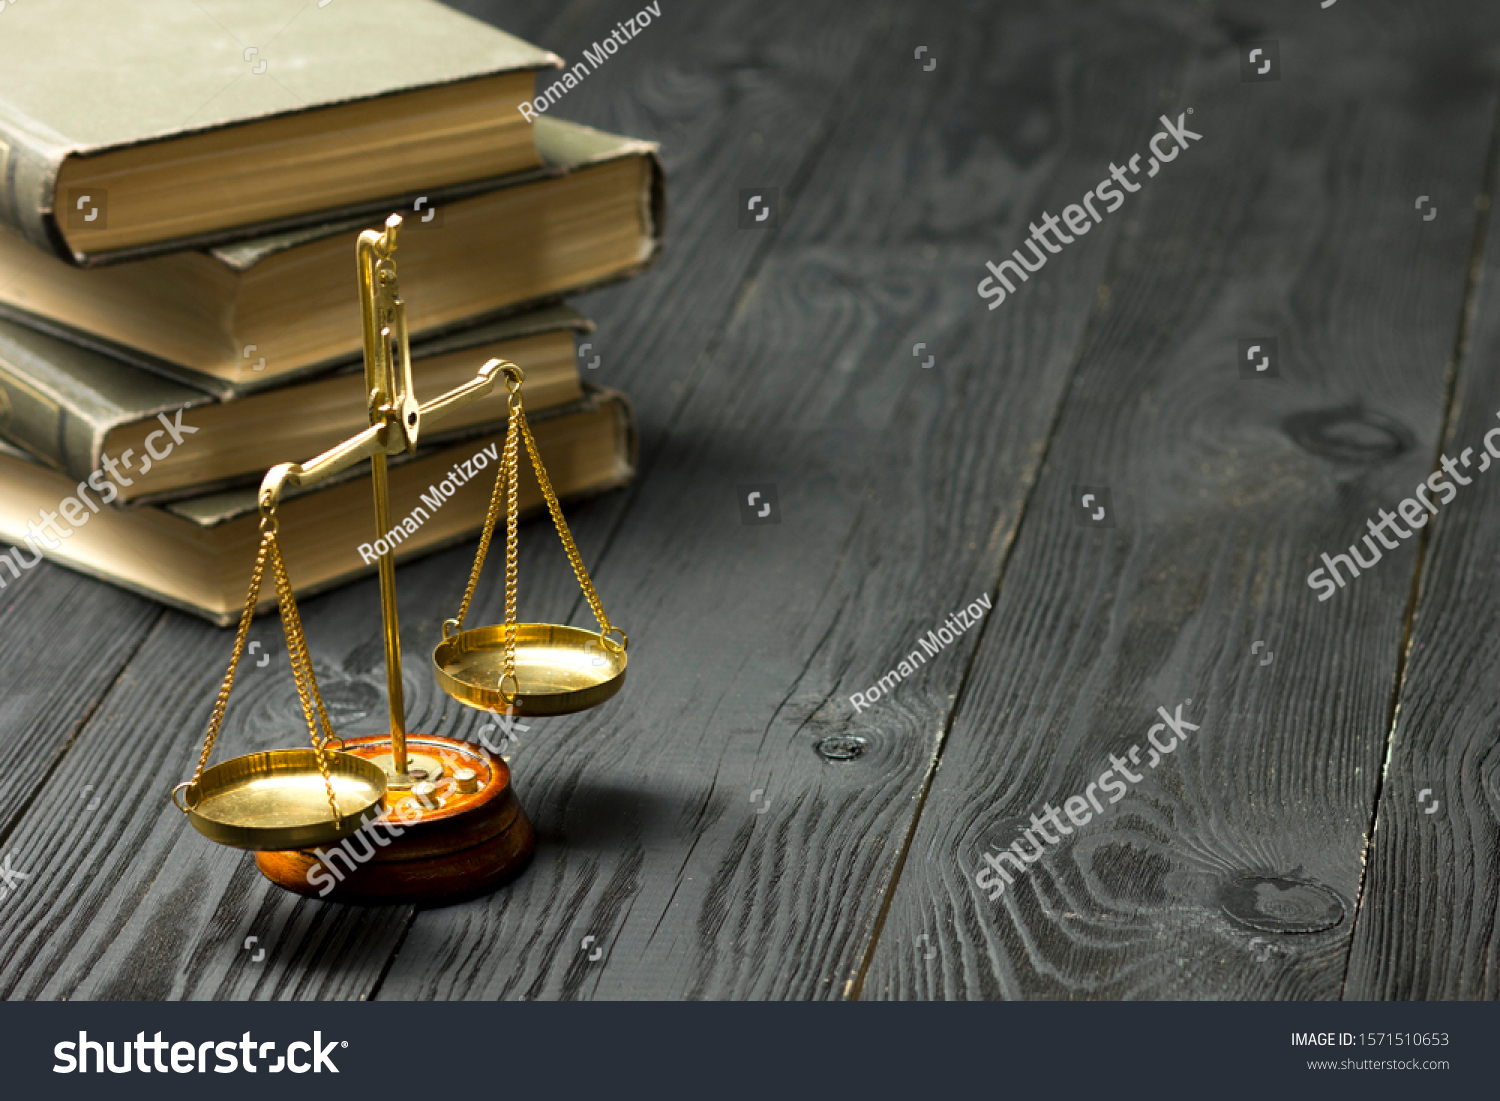 Law concept - Open law book with a wooden judges gavel on table in a courtroom or law enforcement office isolated on white background. Copy space for text. #1571510653